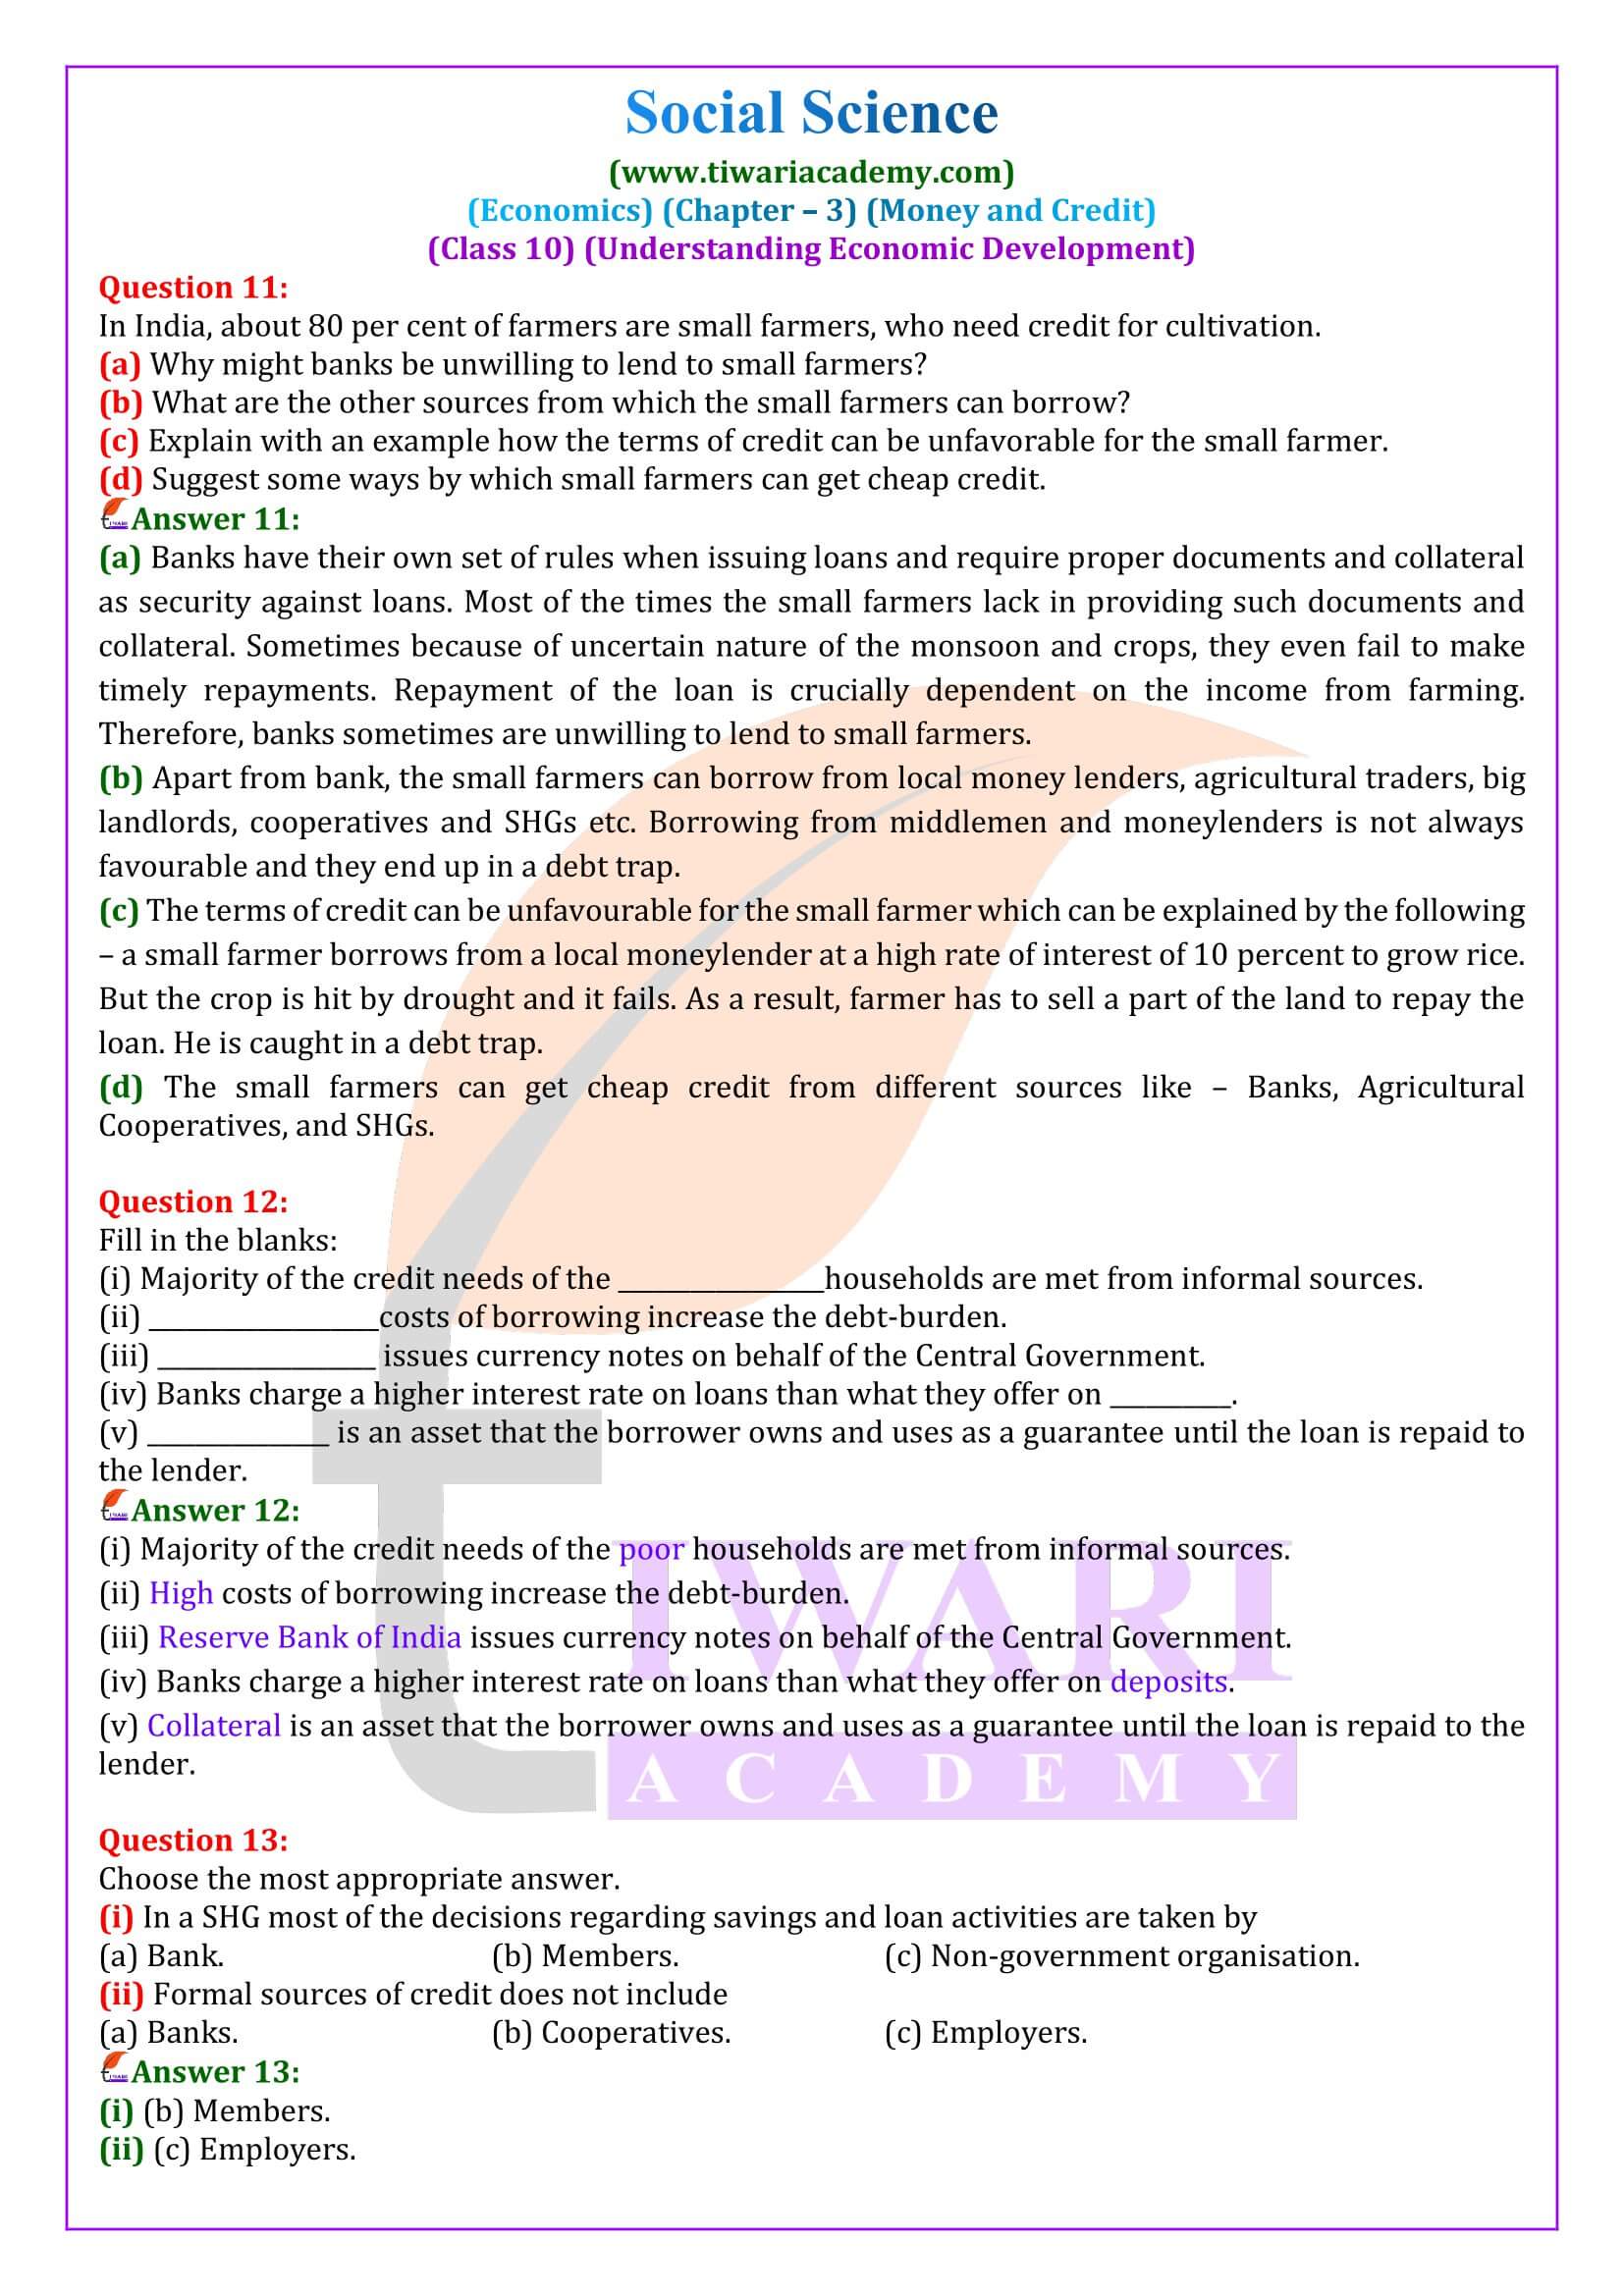 NCERT Solutions for Class 10 Economics Chapter 3 updated